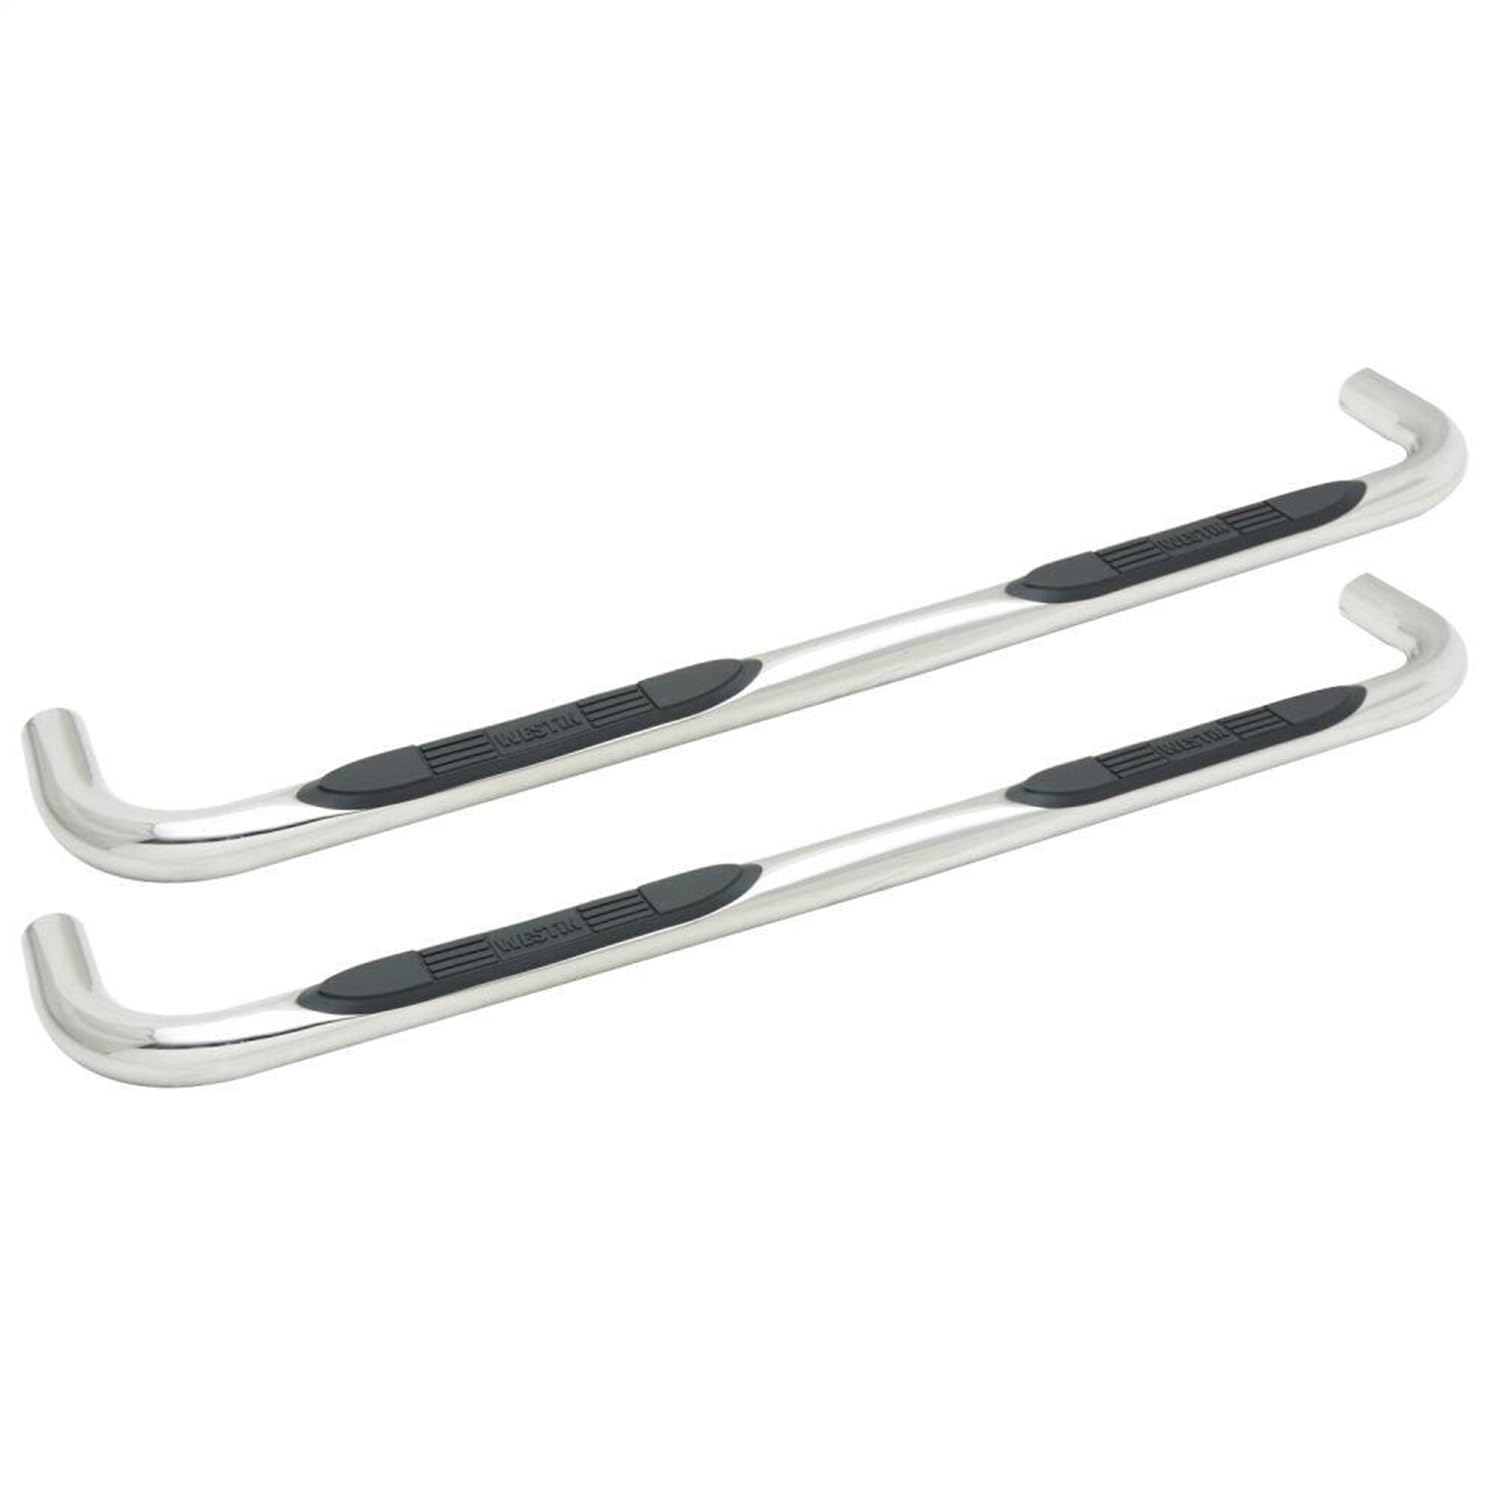 15C F150 SUPERCAB/17C F250/F350 SUPERCAB ESERIES STEP BAR  STAINLESS STEEL